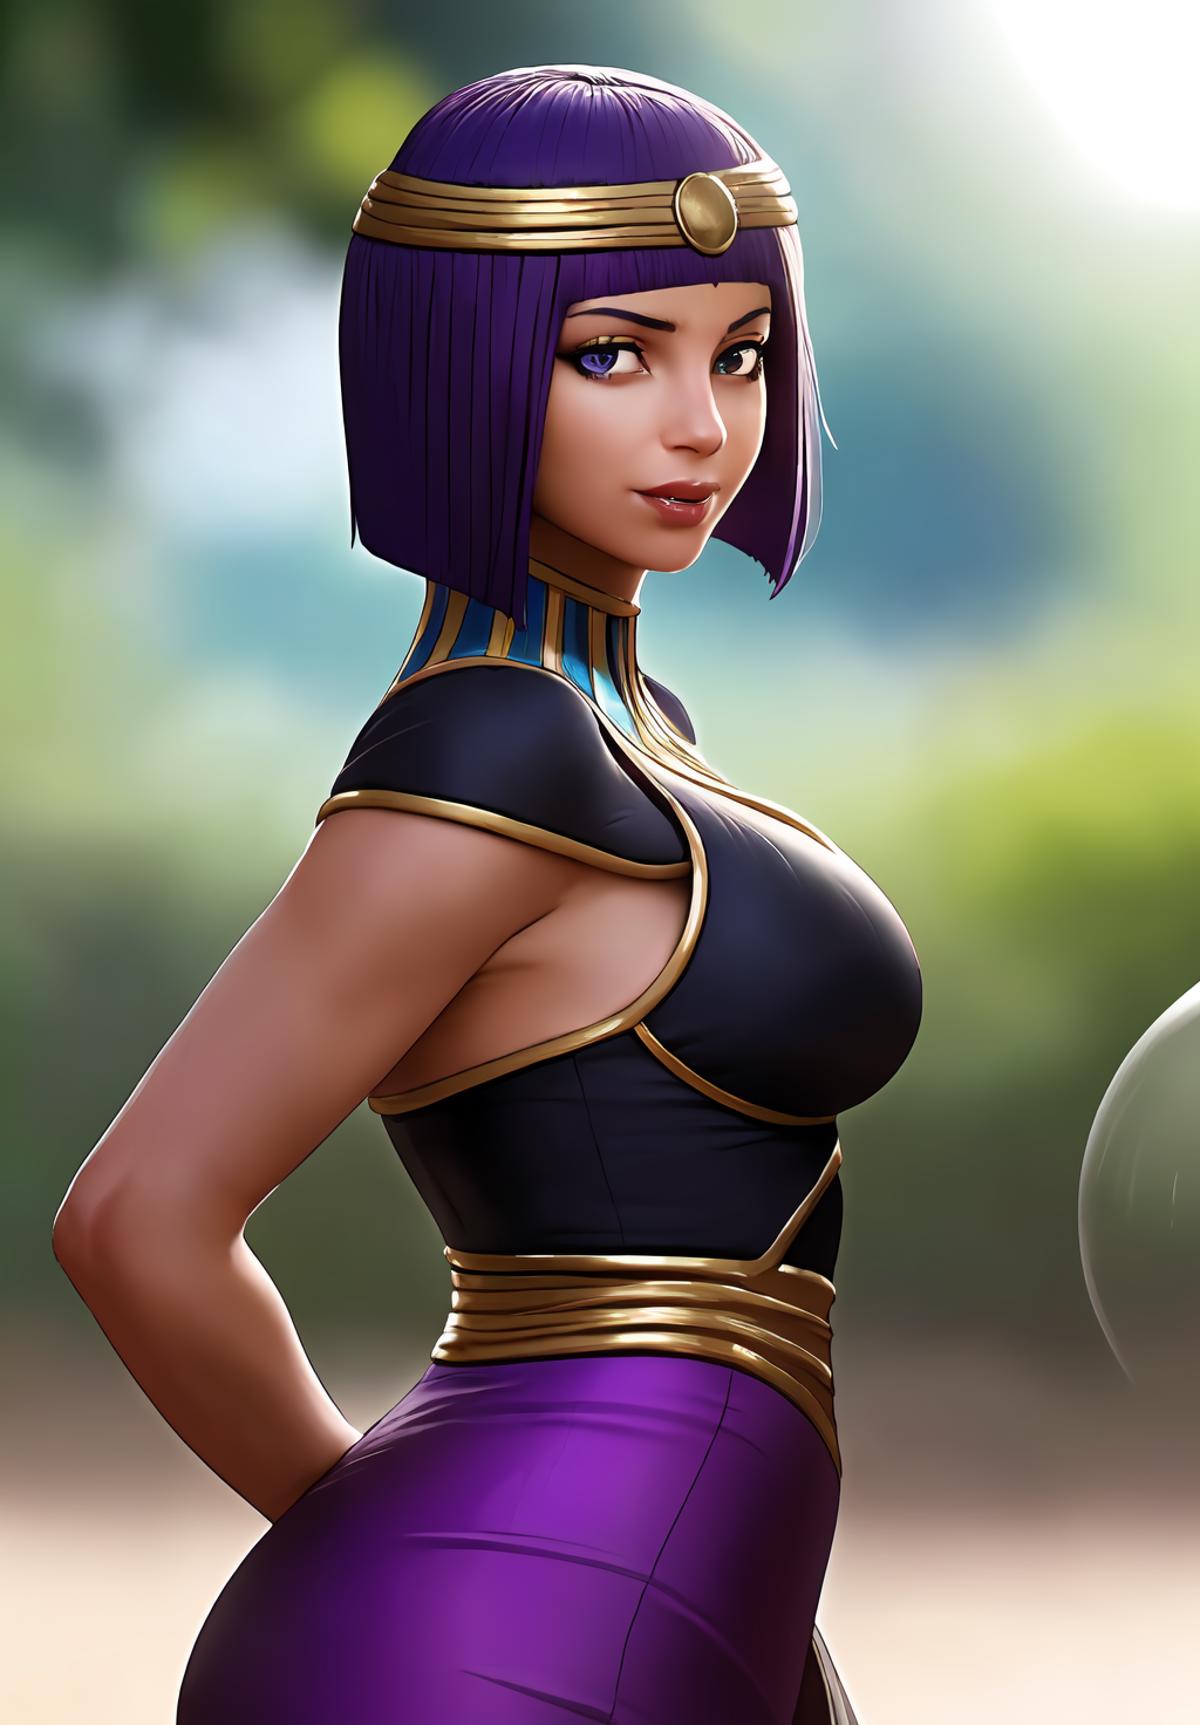 Menat - Street Fighter image by AsaTyr